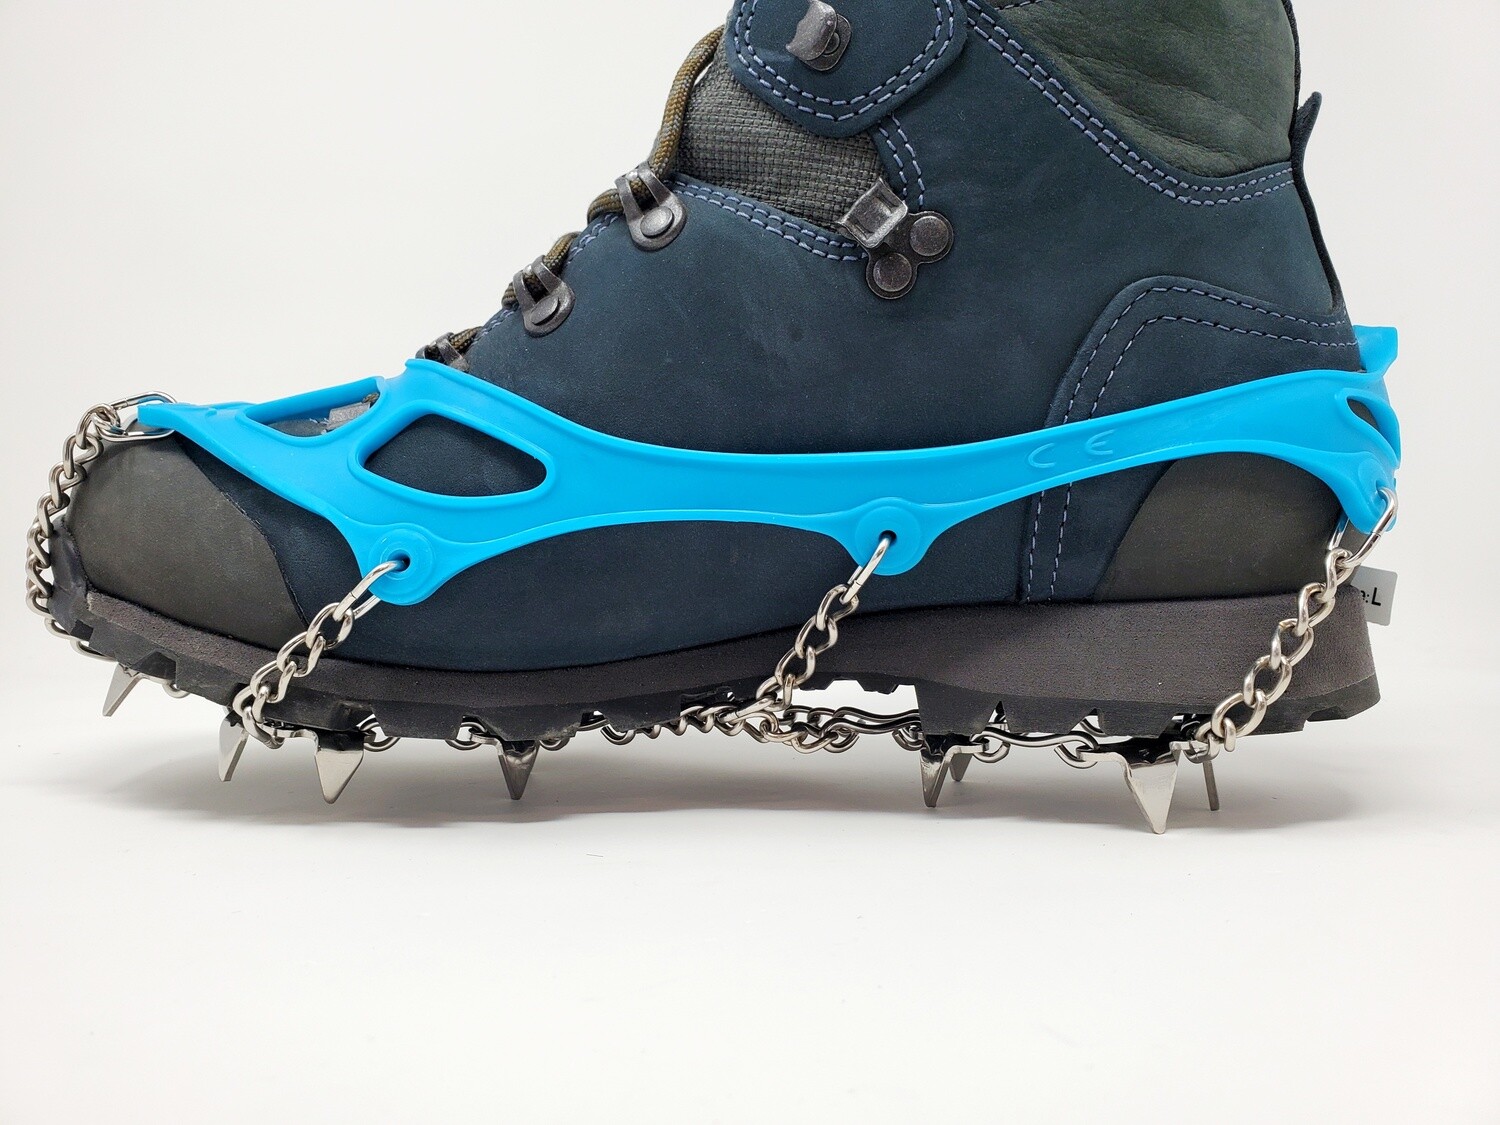 Winter Hiking Anti Slip Traction Device - Free Shipping!